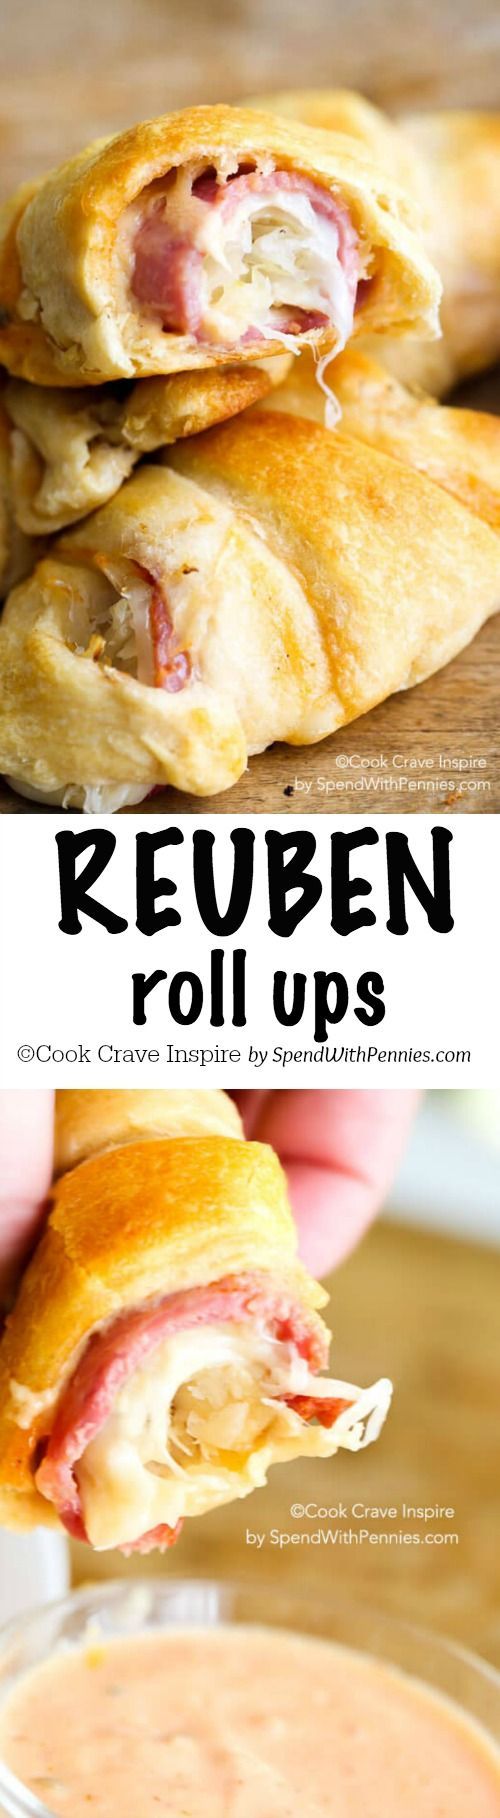 Reuben Roll Ups! All of the deliciousness of a reuben sandwich in an easy to make